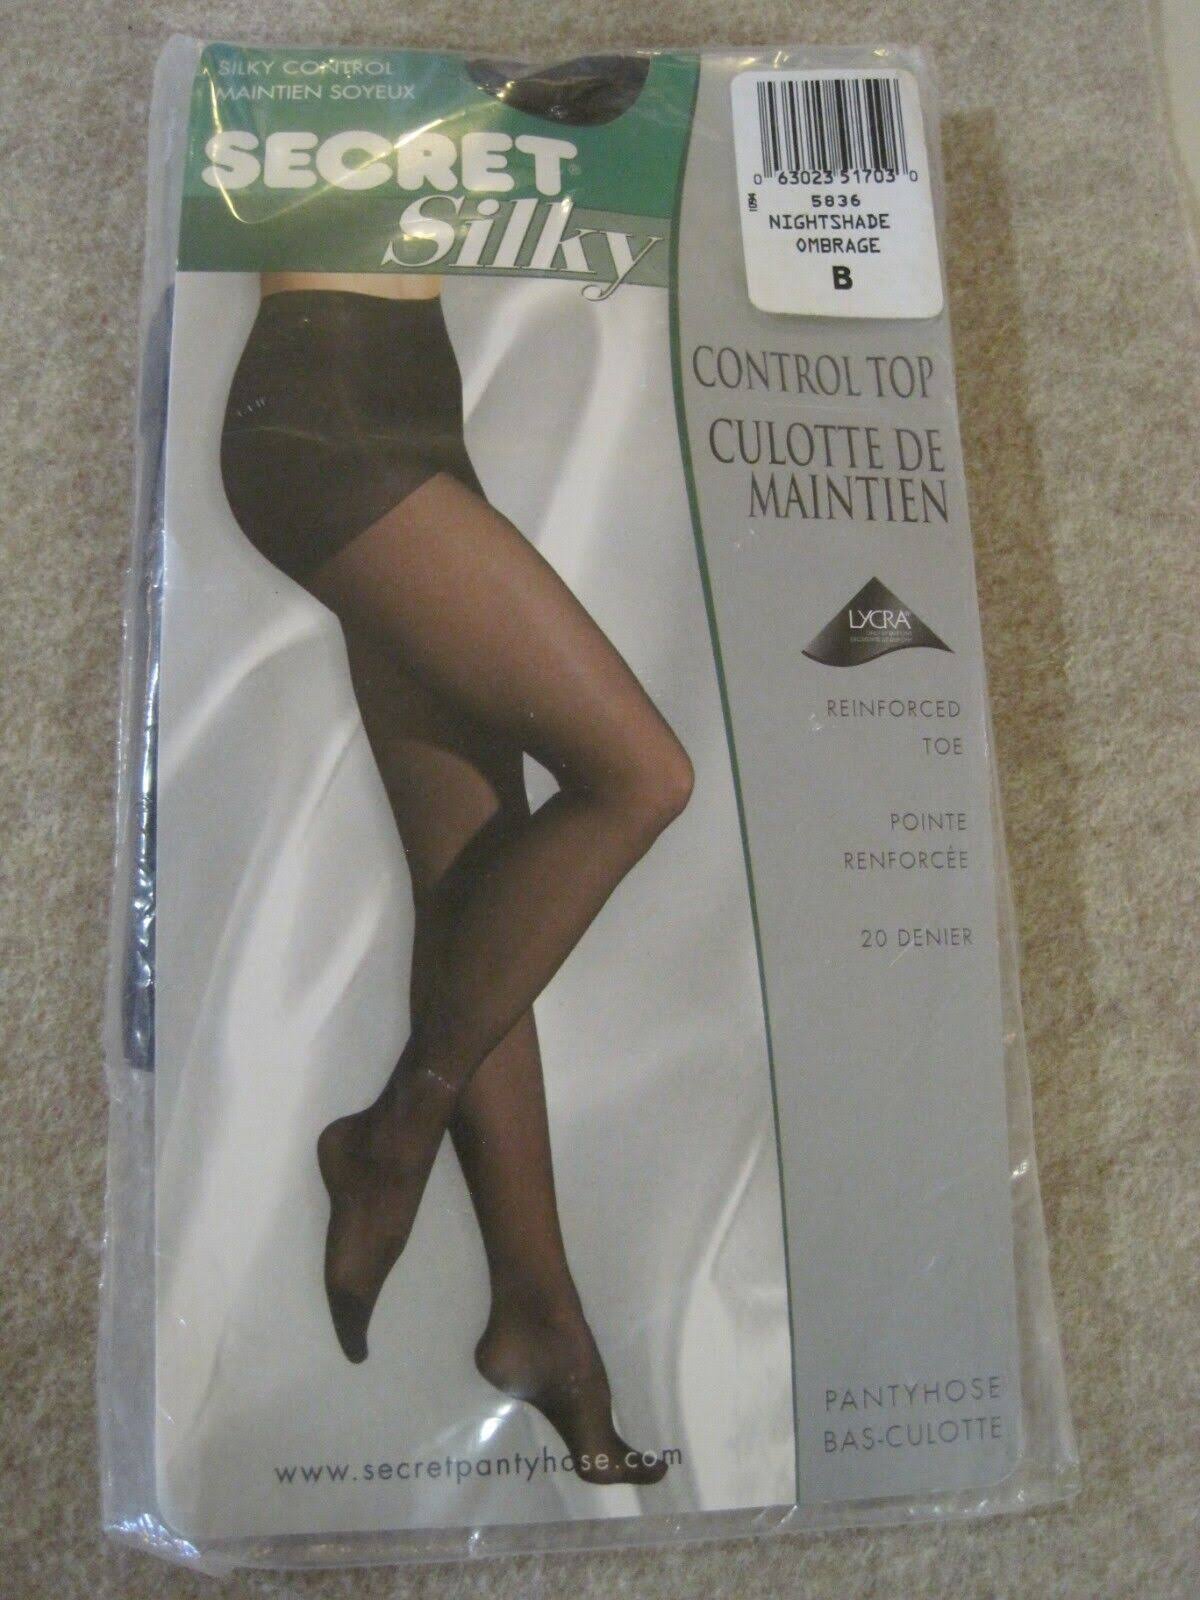 Secret Silky Run Resistant Control Top with Sandalfoot C Neutral Pantyhose